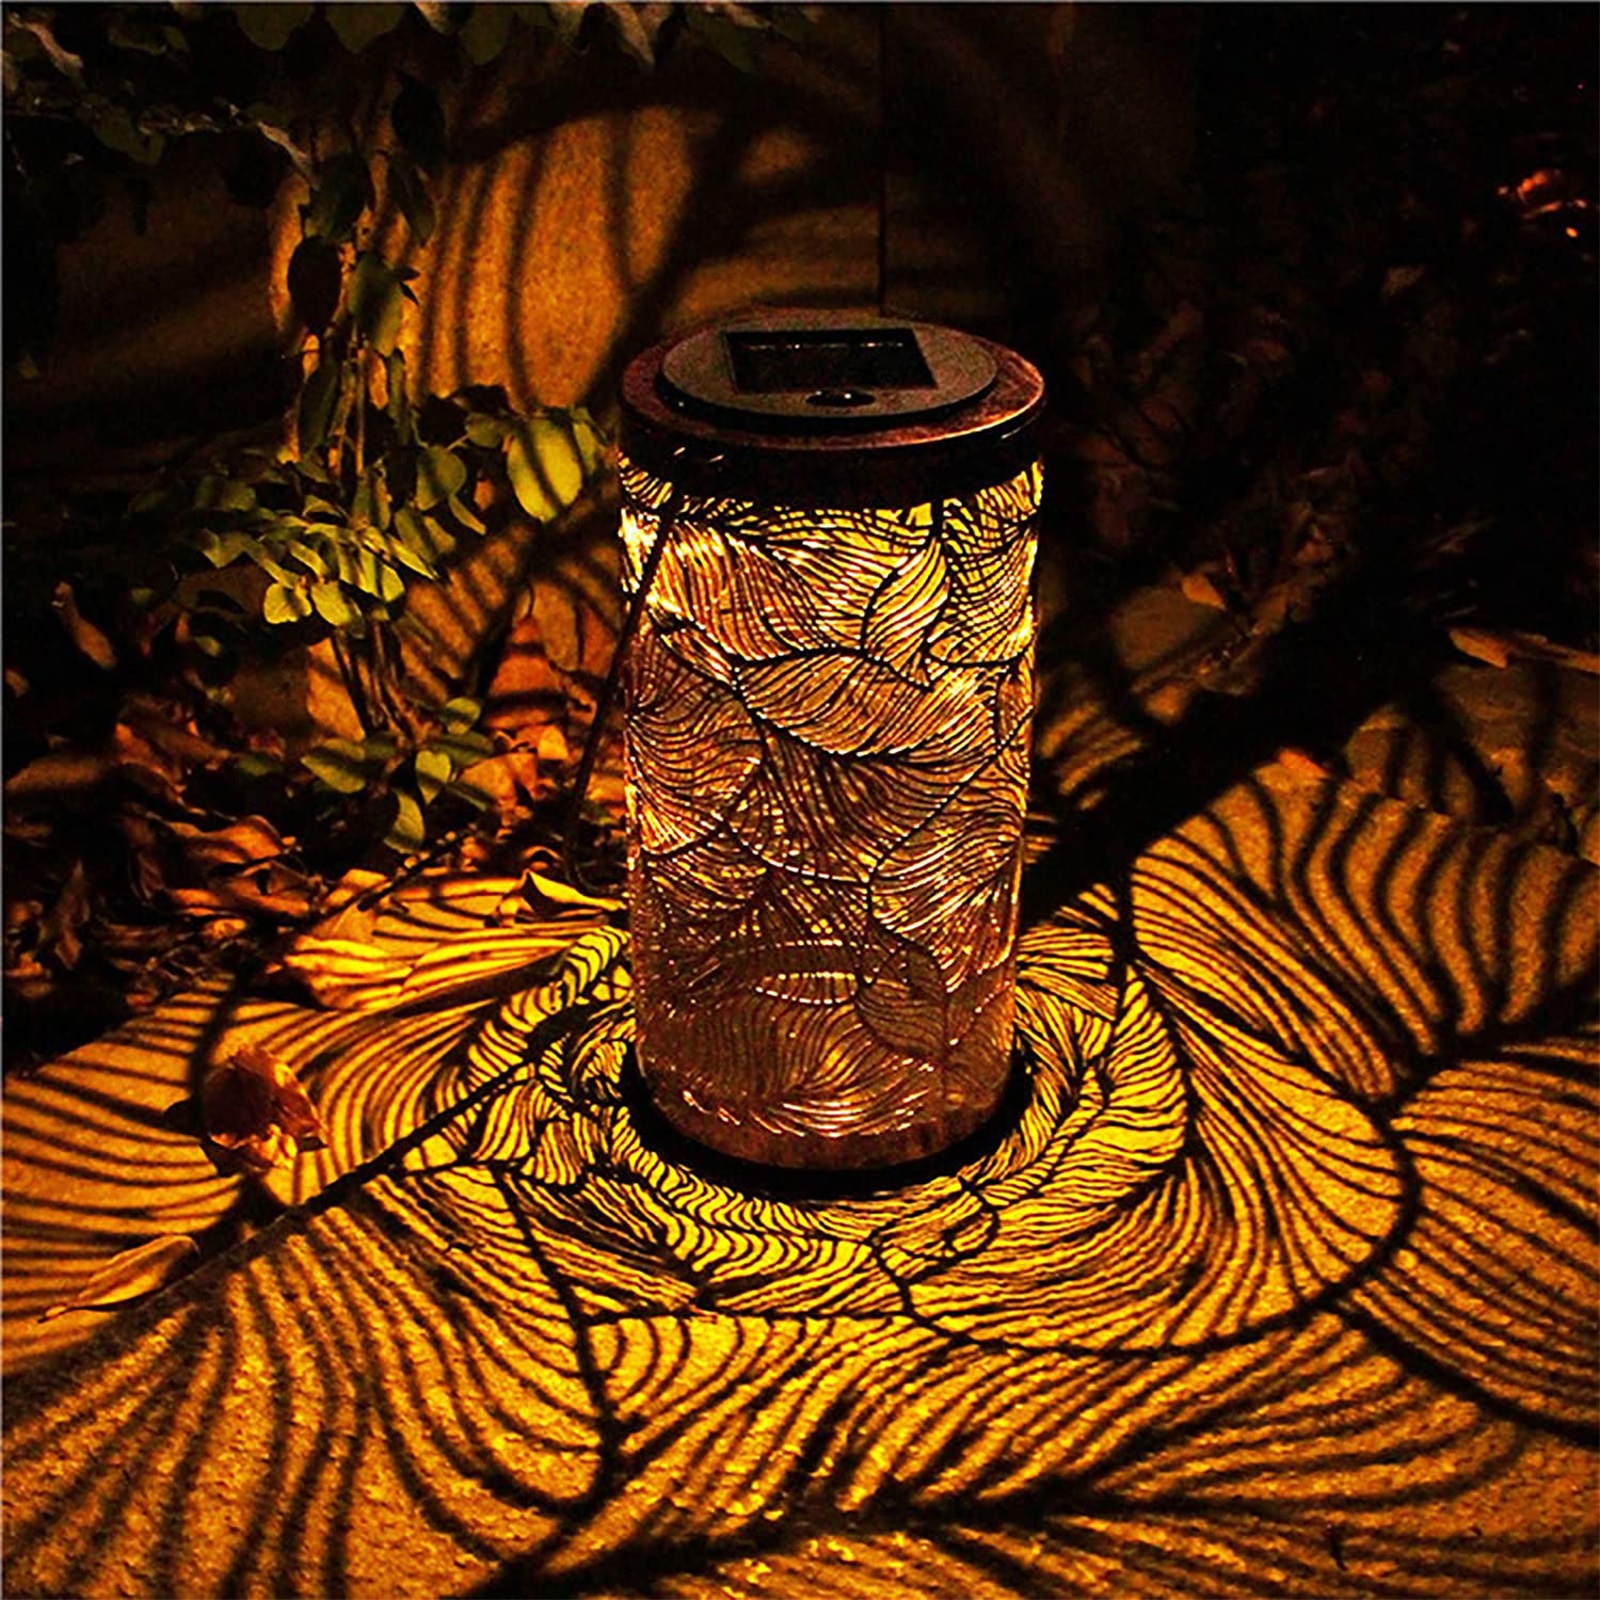 Solar Outdoor Light Vintage Leaves Iron Art Lamp Waterproof Retro Hanging Lantern with Handle for Garden Patio yard Lawn Lights